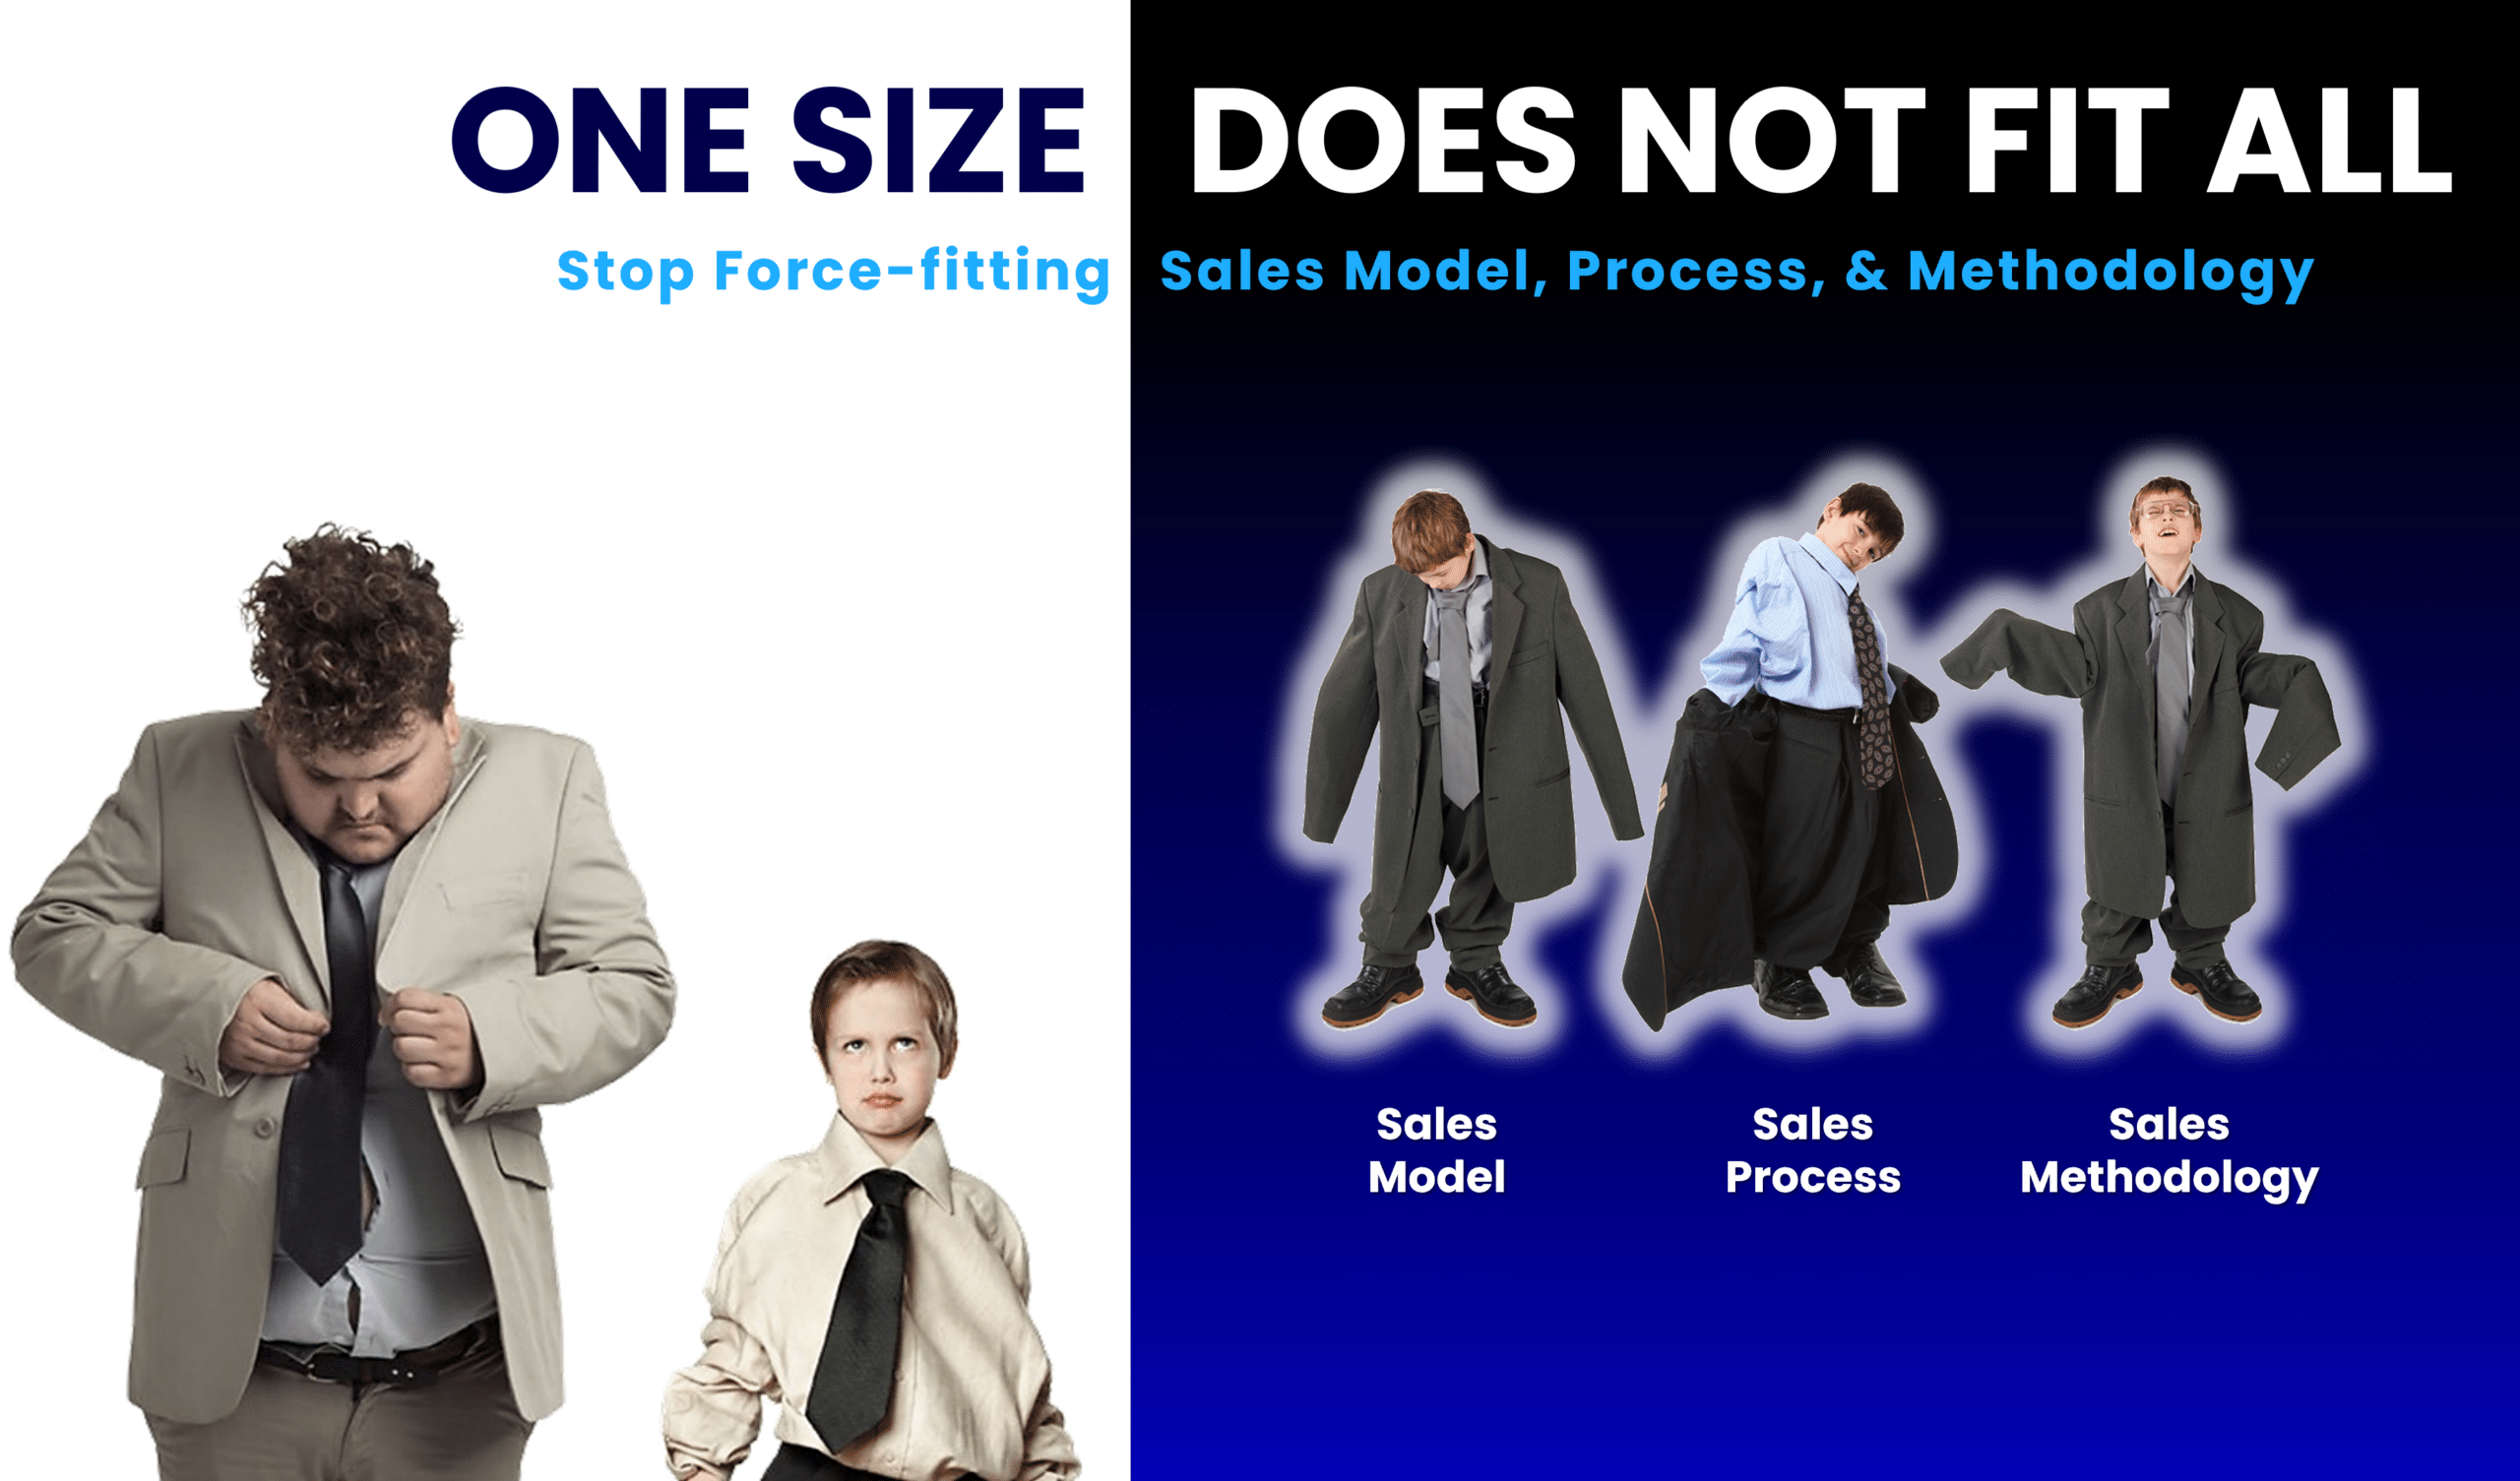 One size does not fit all